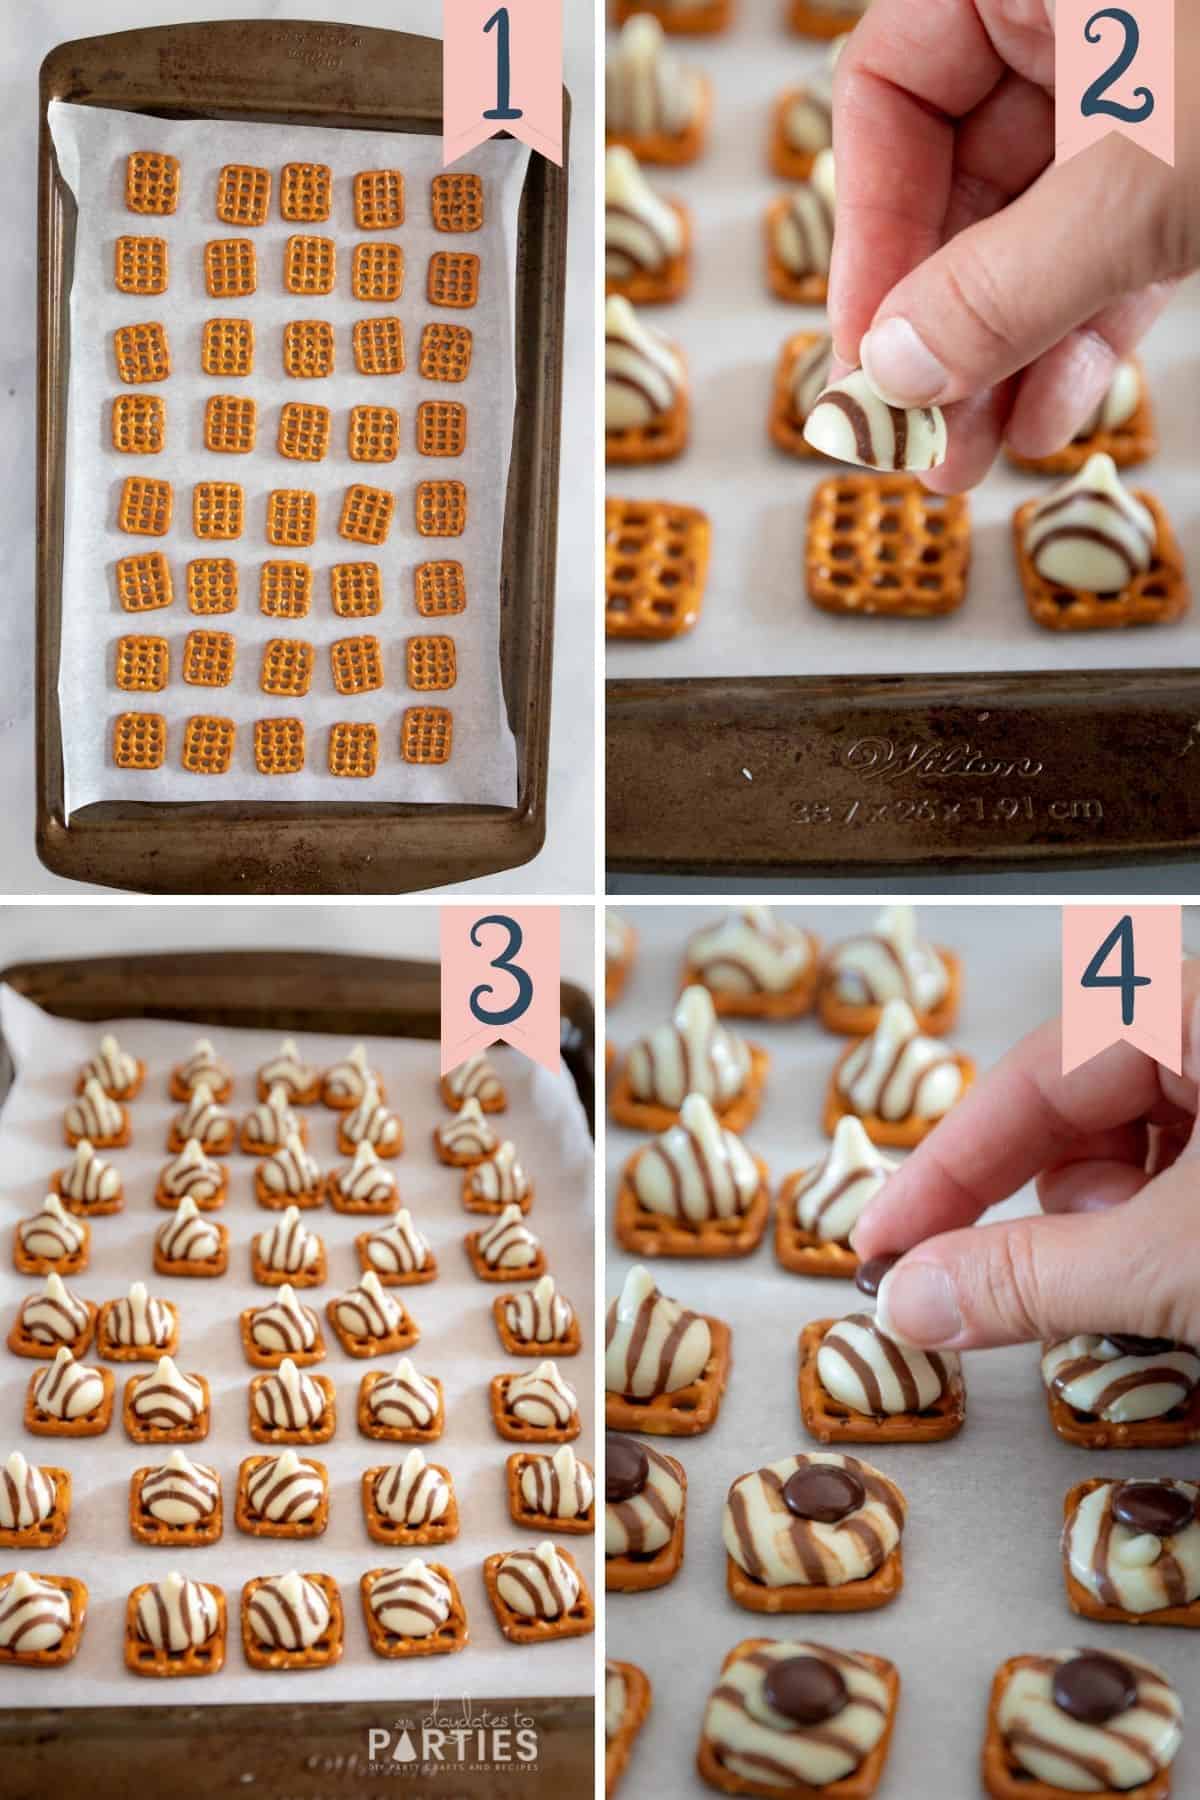 Step by step collage how to make Hershey's pretzel bites.